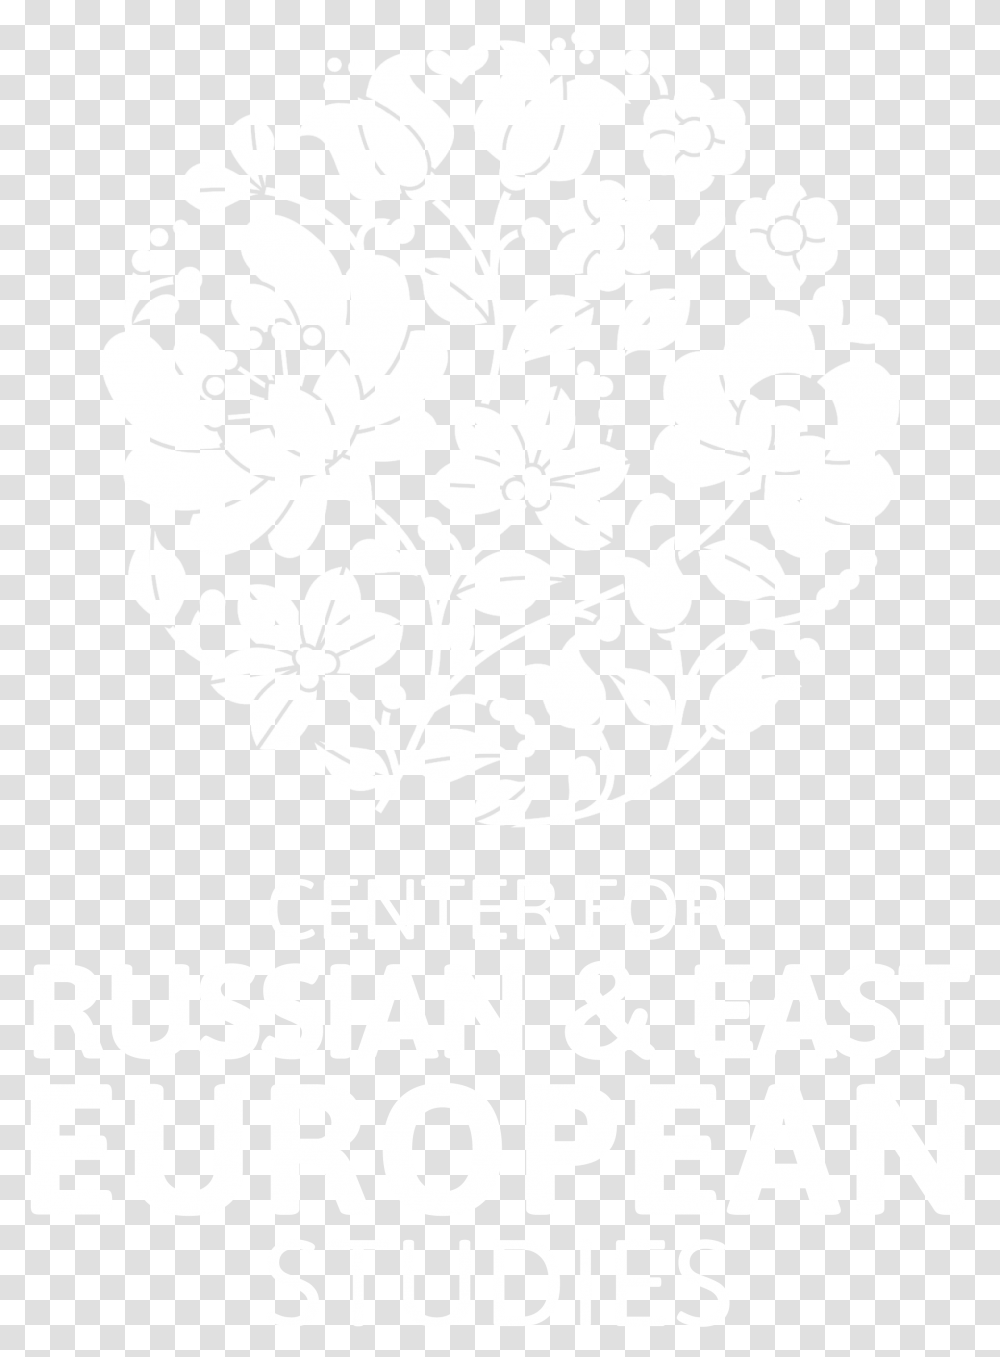 Rees Logo Vertical White Black And White Embroidery Designs, Floral Design, Pattern Transparent Png